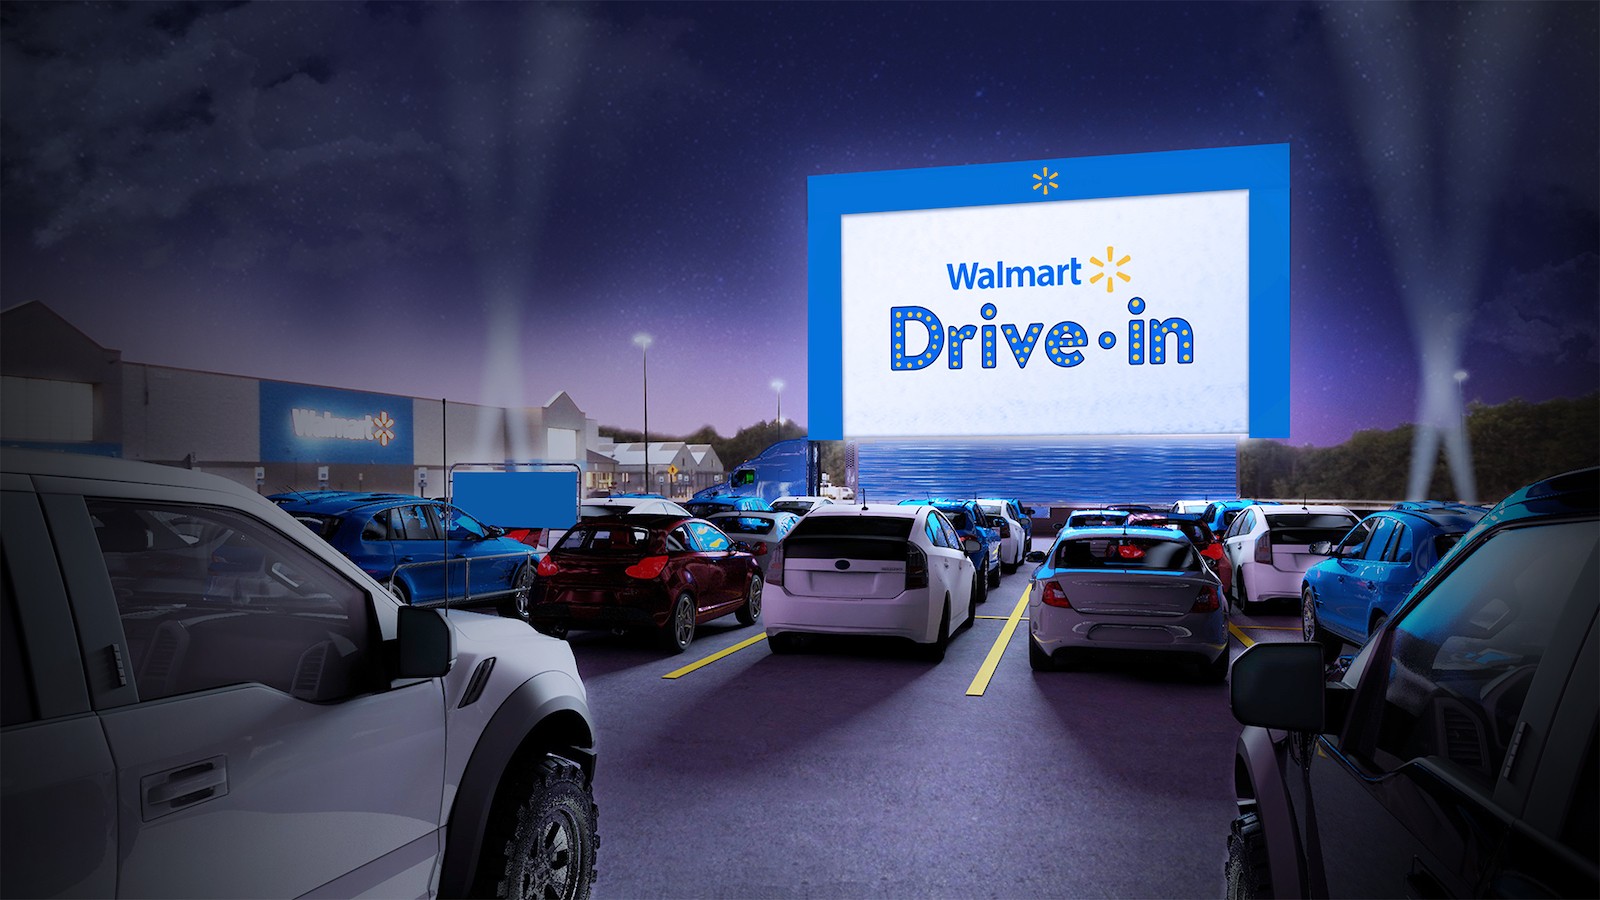 Walmart Will Use Some of its Parking Lots as ‘Drive-In’ Theaters